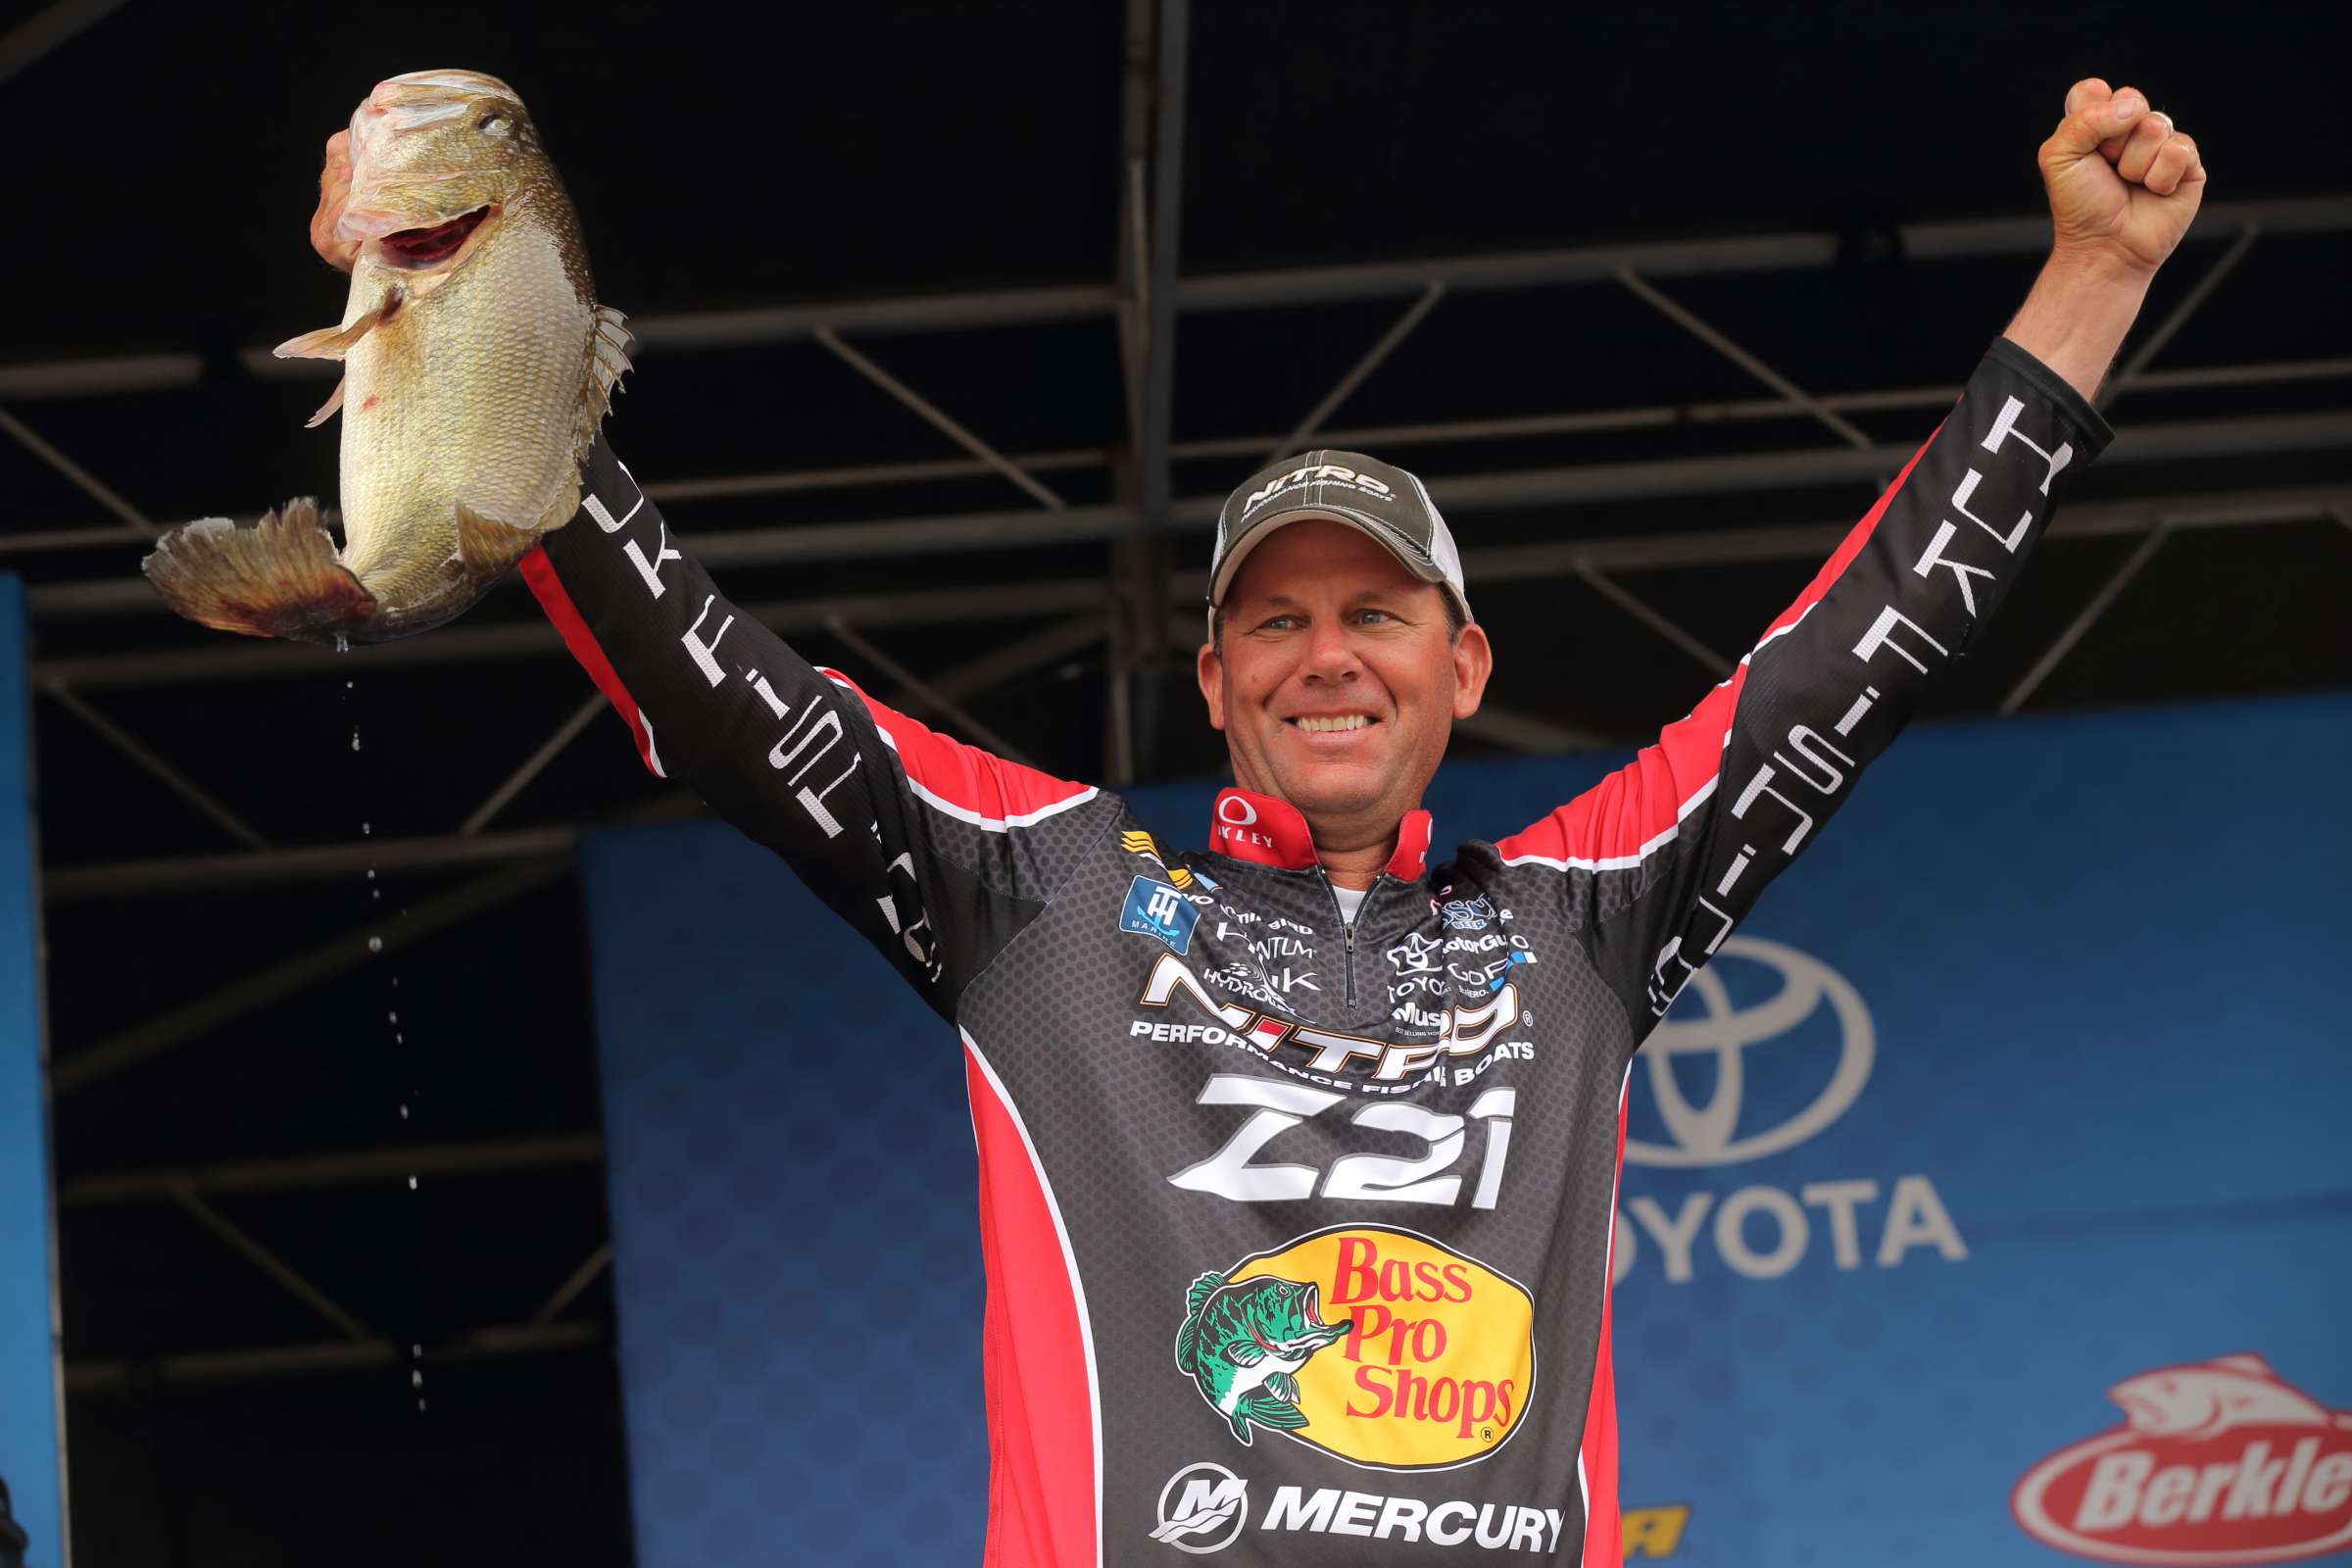 In 2016, Kevin VanDam ended an Elite Series victory drought by winning in dramatic fashion. 